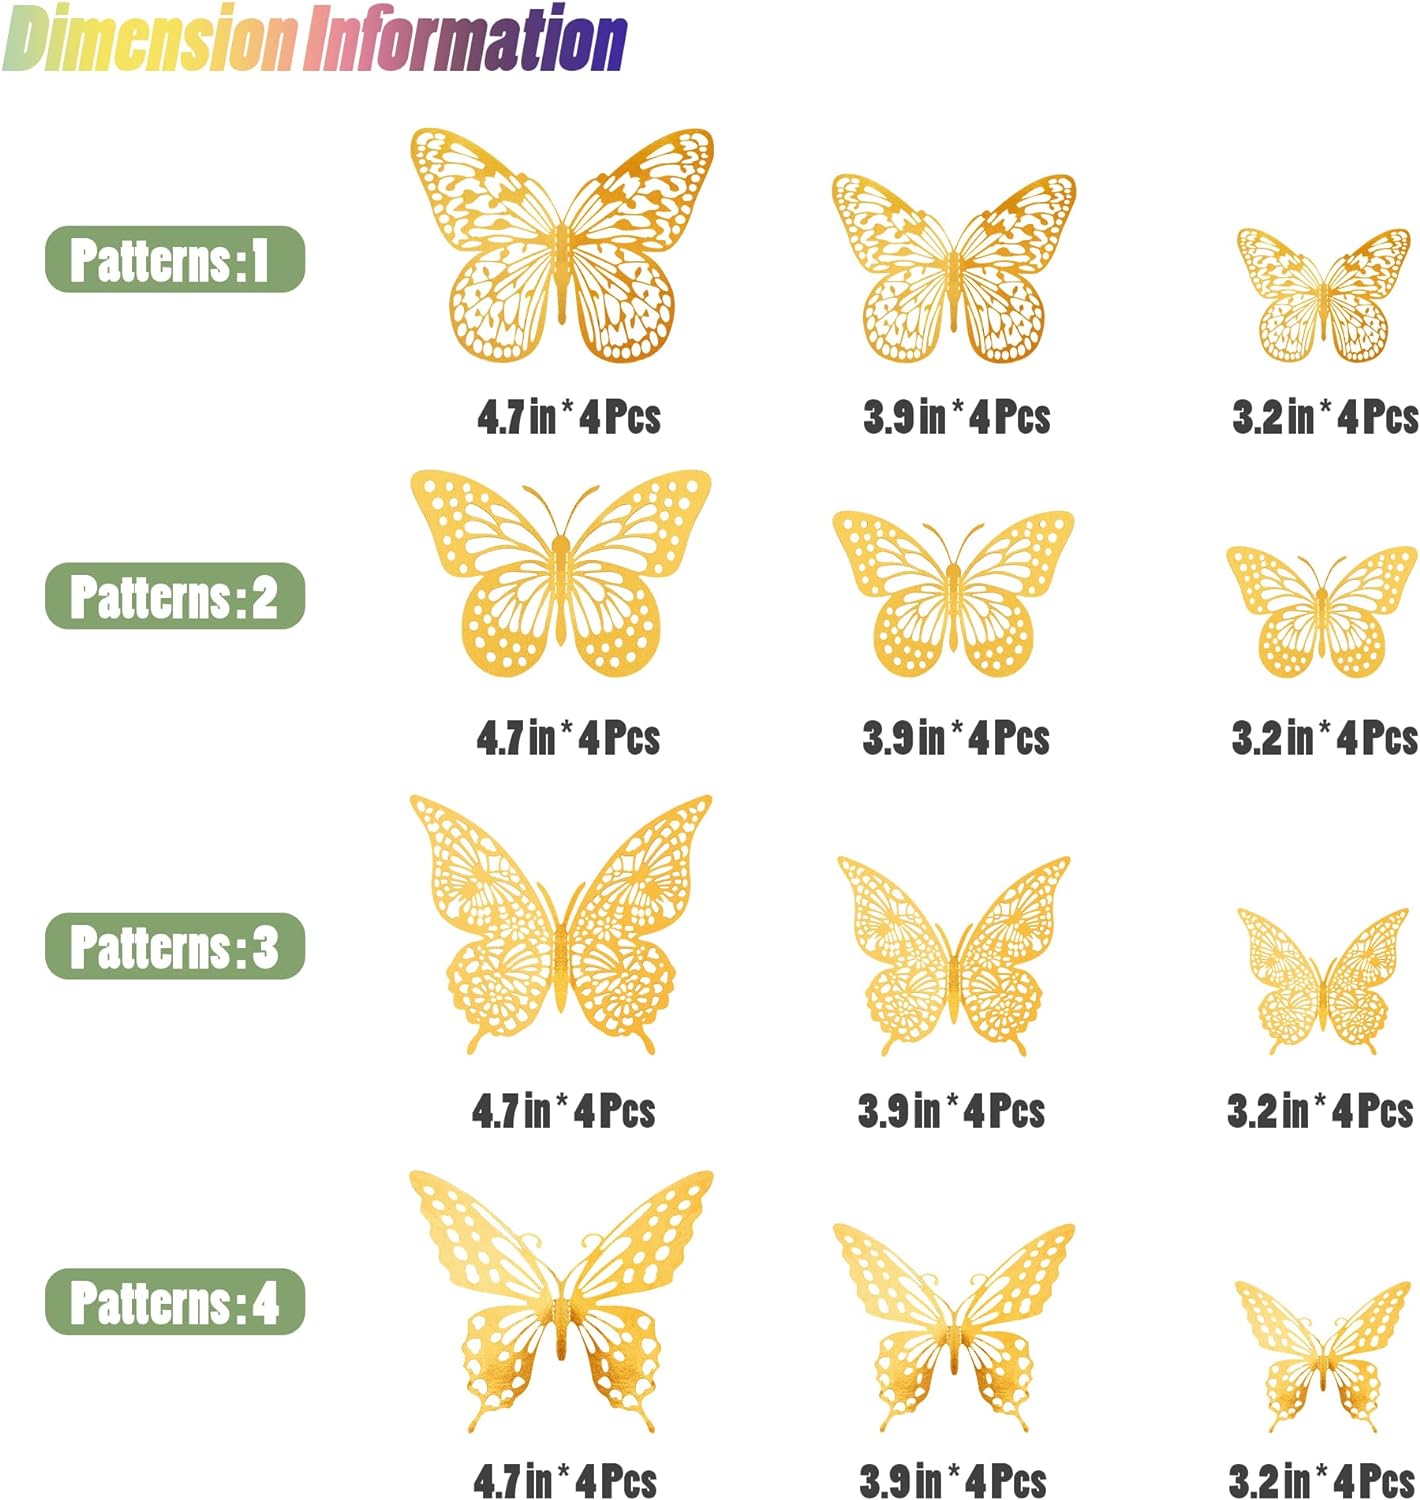 SAOROPEB 3D Butterfly Wall Decor 48 Pcs 4 Styles 3 Sizes, Gold Butterfly Decorations for Butterfly Birthday Decorations Butterfly Party Decorations Cake Decorations, Removable Stickers (Gold)